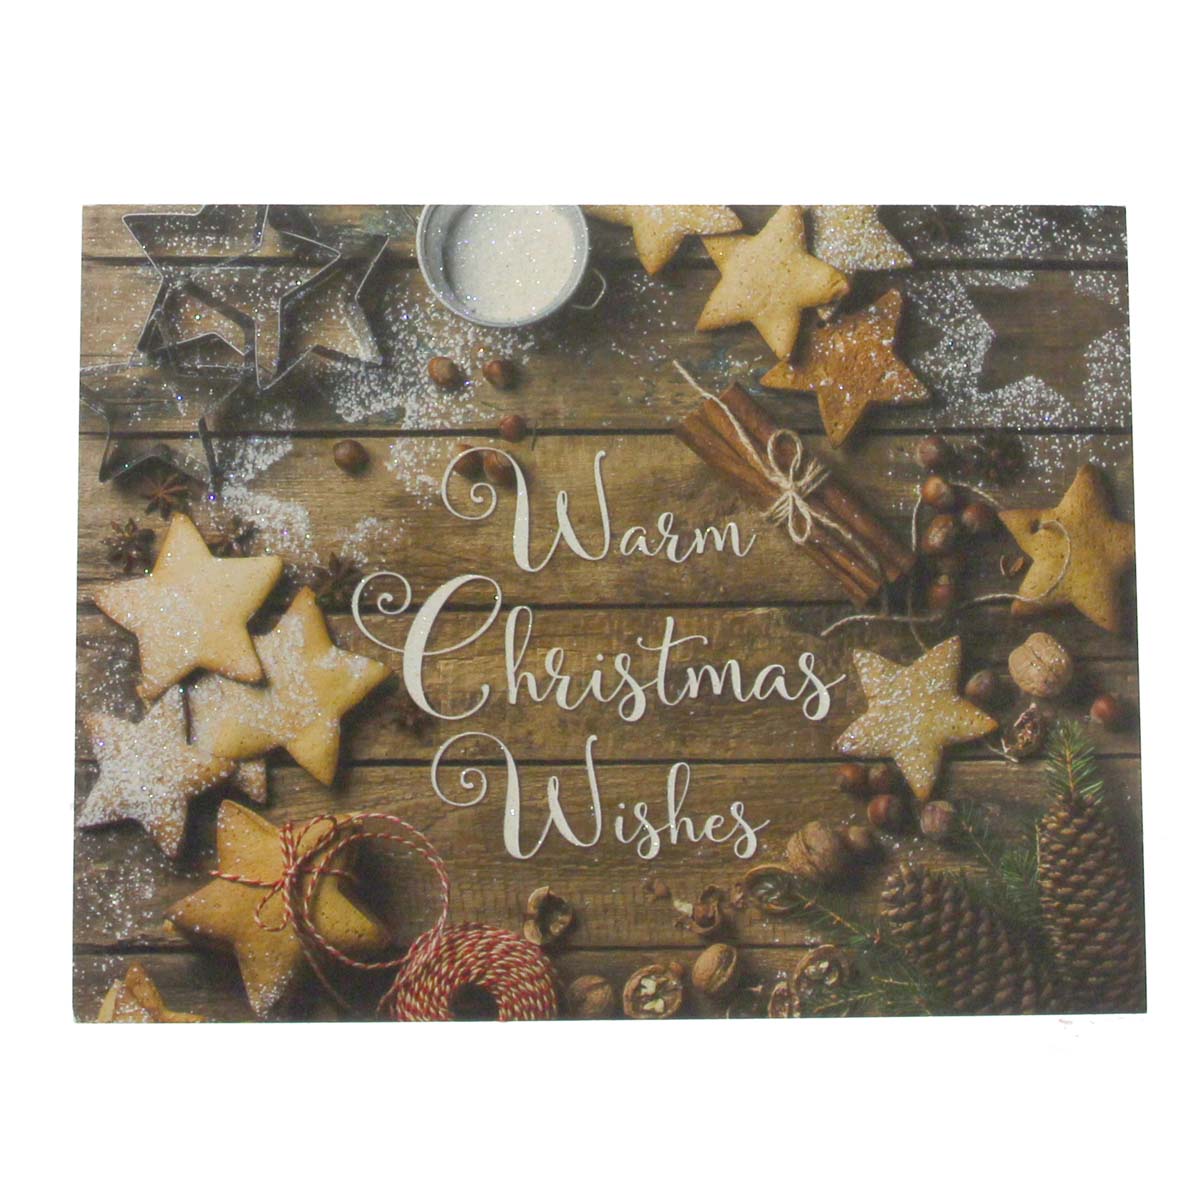 Christmas Boxed Cards, Warm Christmas Wishes, Box of 10, image of cookies & baking